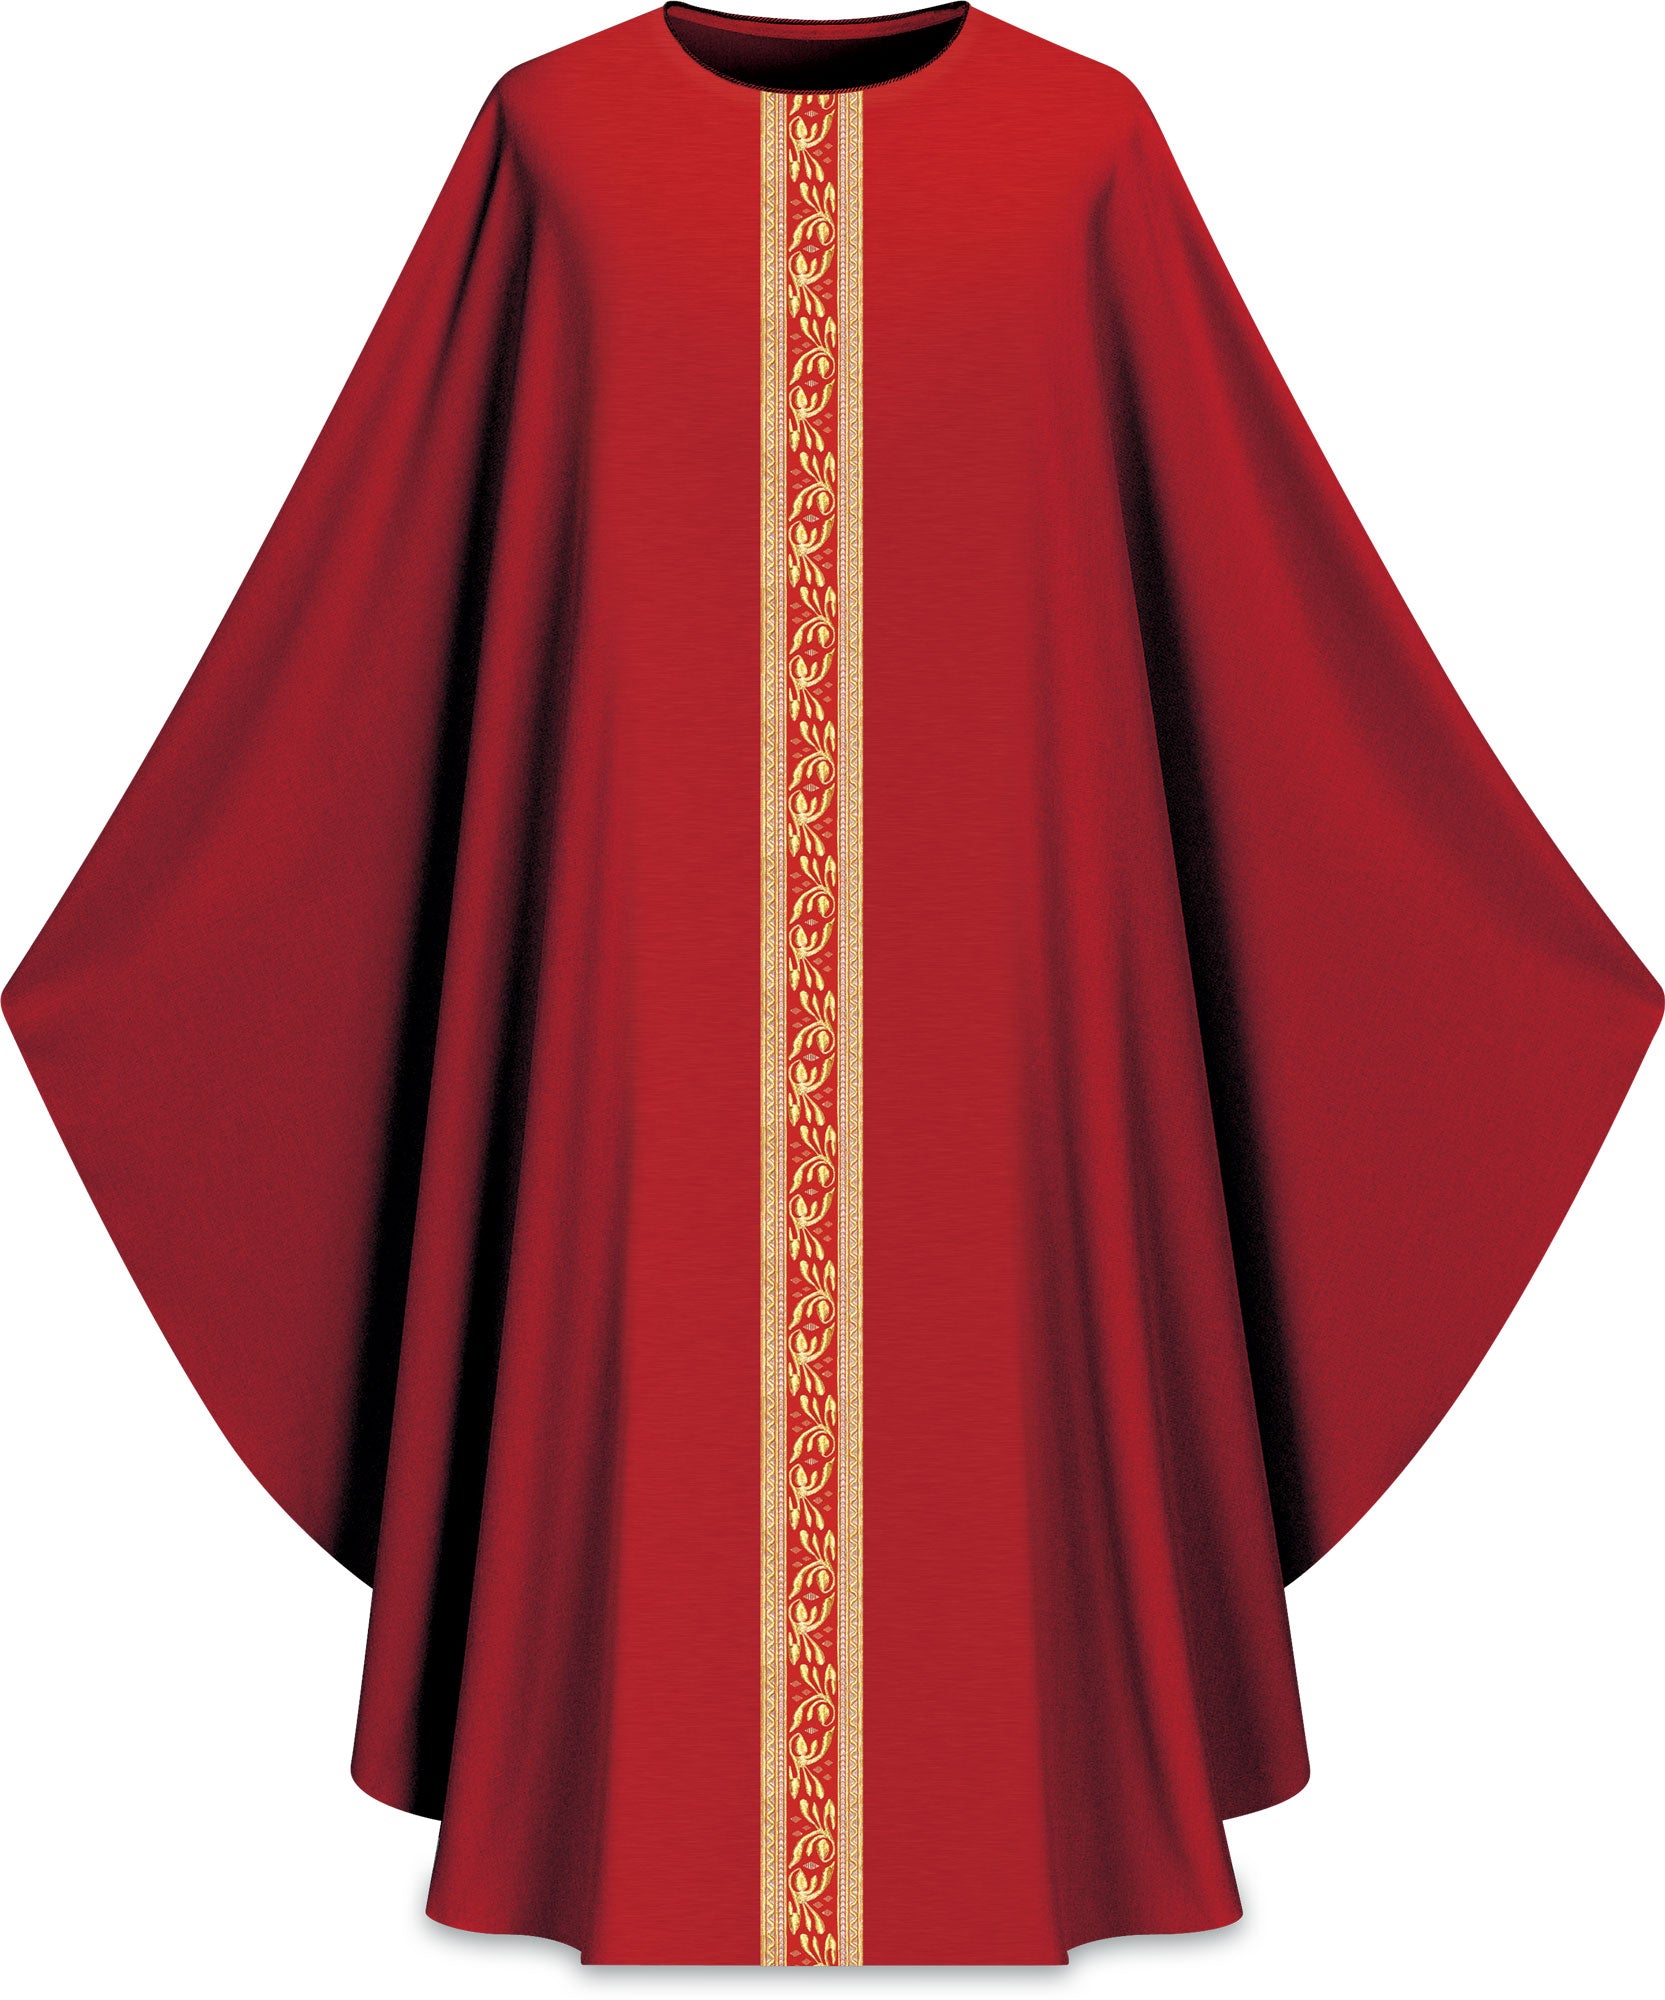 chasuble-5184-red.jpg